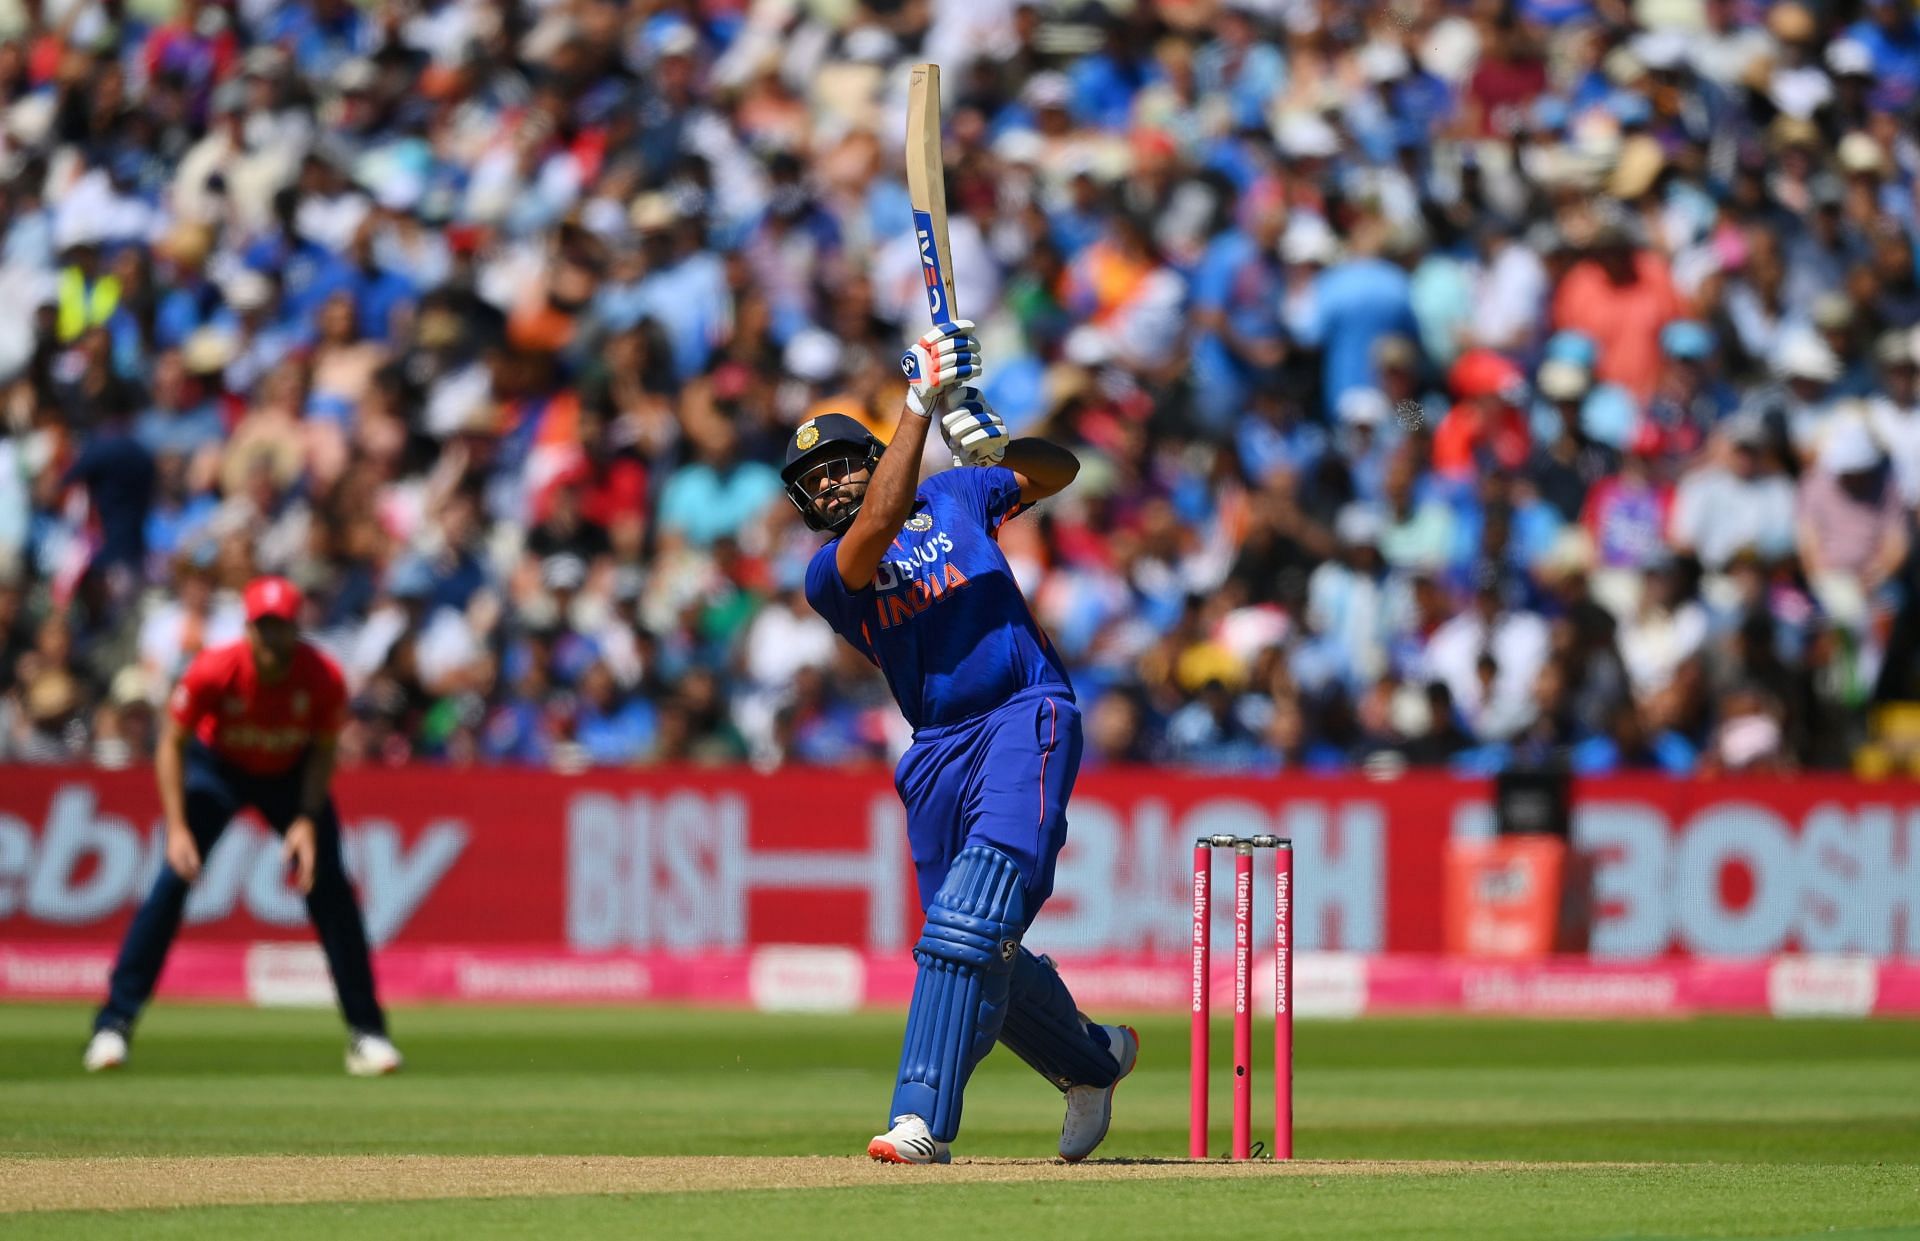 Rohit Sharma gave India a quickfire start with a cameo of 31 off 20 balls